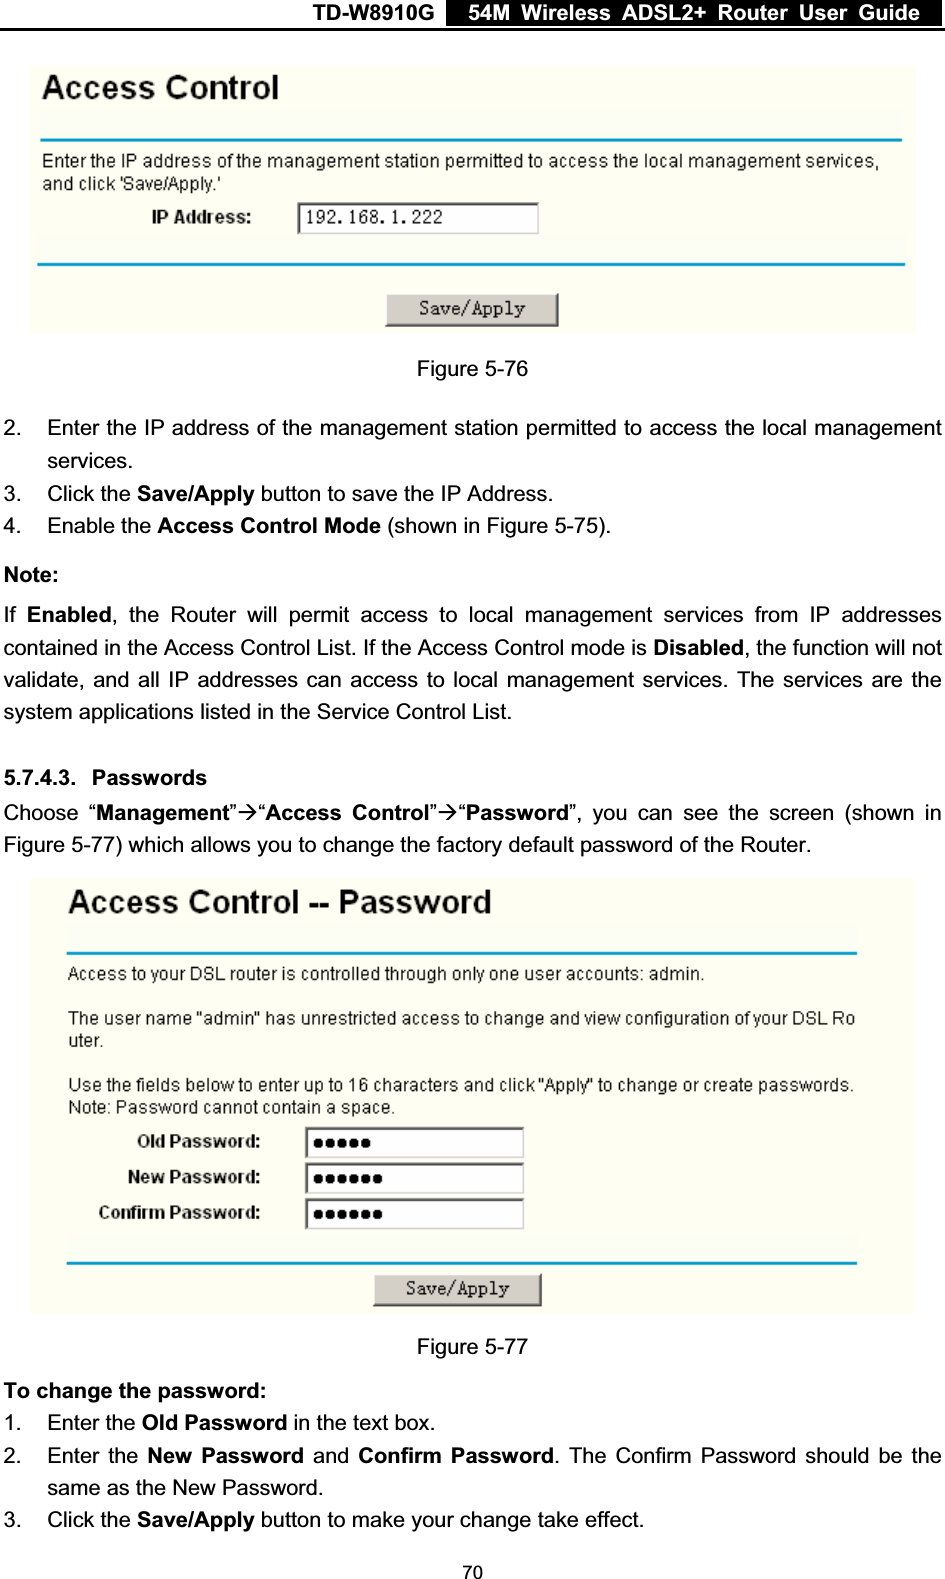 TD-W8910G    54M Wireless ADSL2+ Router User Guide  Figure 5-76 2.  Enter the IP address of the management station permitted to access the local management services. 3. Click the Save/Apply button to save the IP Address. 4. Enable the Access Control Mode (shown in Figure 5-75).Note:If Enabled, the Router will permit access to local management services from IP addresses contained in the Access Control List. If the Access Control mode is Disabled, the function will not validate, and all IP addresses can access to local management services. The services are the system applications listed in the Service Control List. 5.7.4.3. Passwords Choose “Management”Æ“Access Control”Æ“Password”, you can see the screen (shown in Figure 5-77) which allows you to change the factory default password of the Router. Figure 5-77 To change the password:1. Enter the Old Password in the text box. 2. Enter the New Password and Confirm Password. The Confirm Password should be the same as the New Password. 3. Click the Save/Apply button to make your change take effect.  70